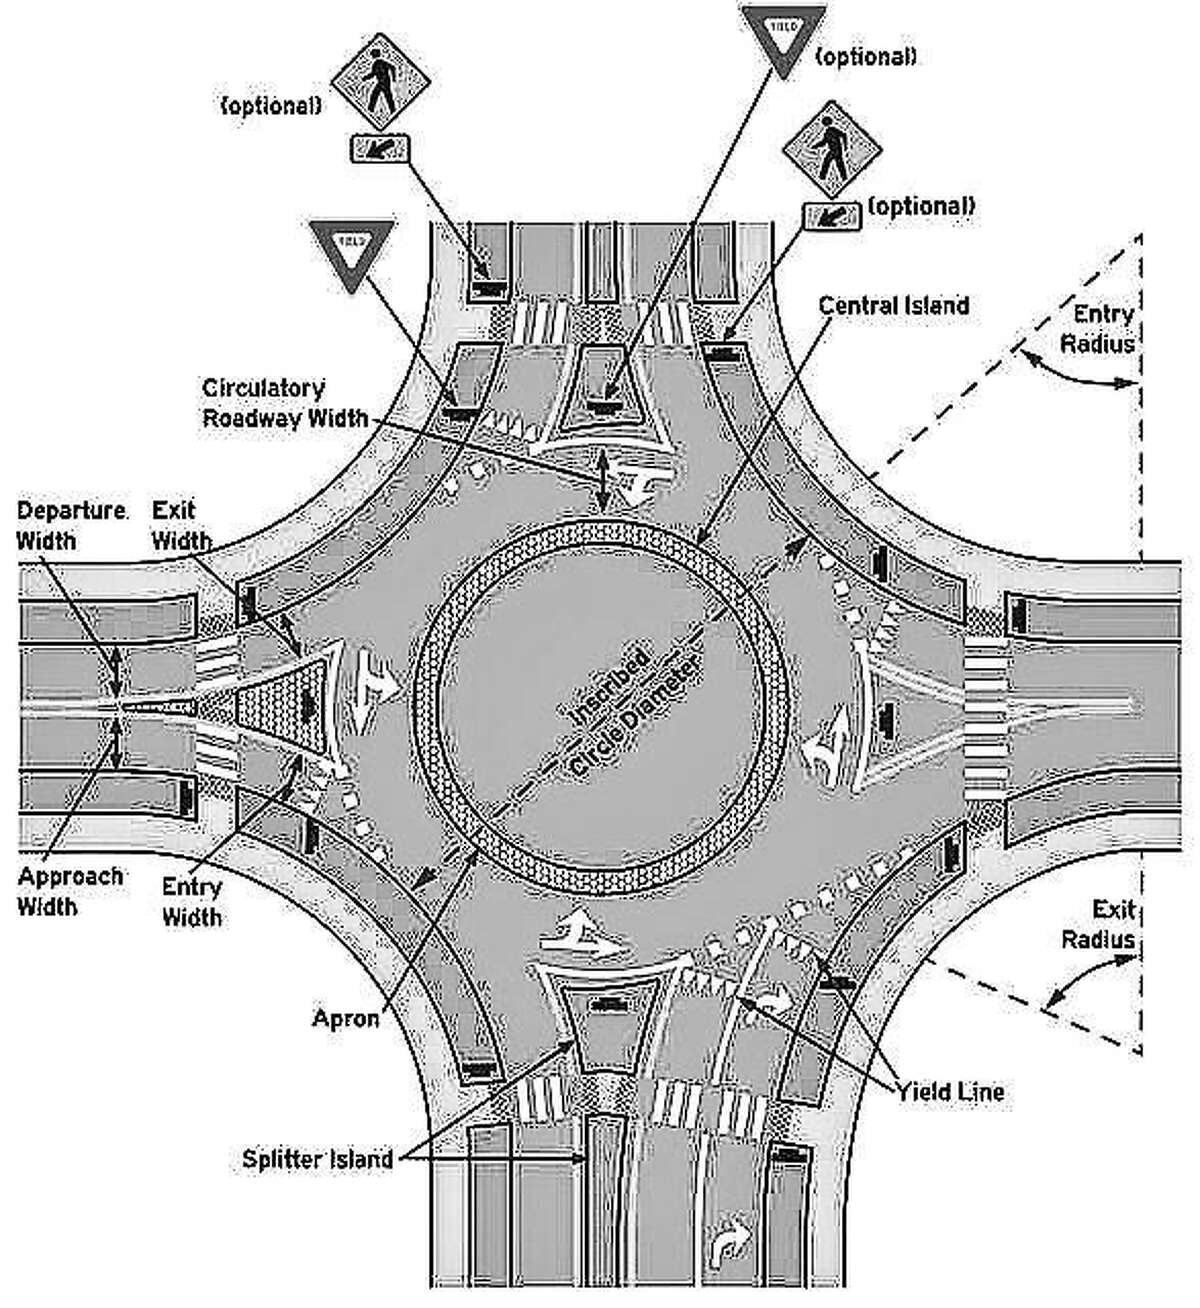 One type of roundabout used instead of a four-way stoplight.